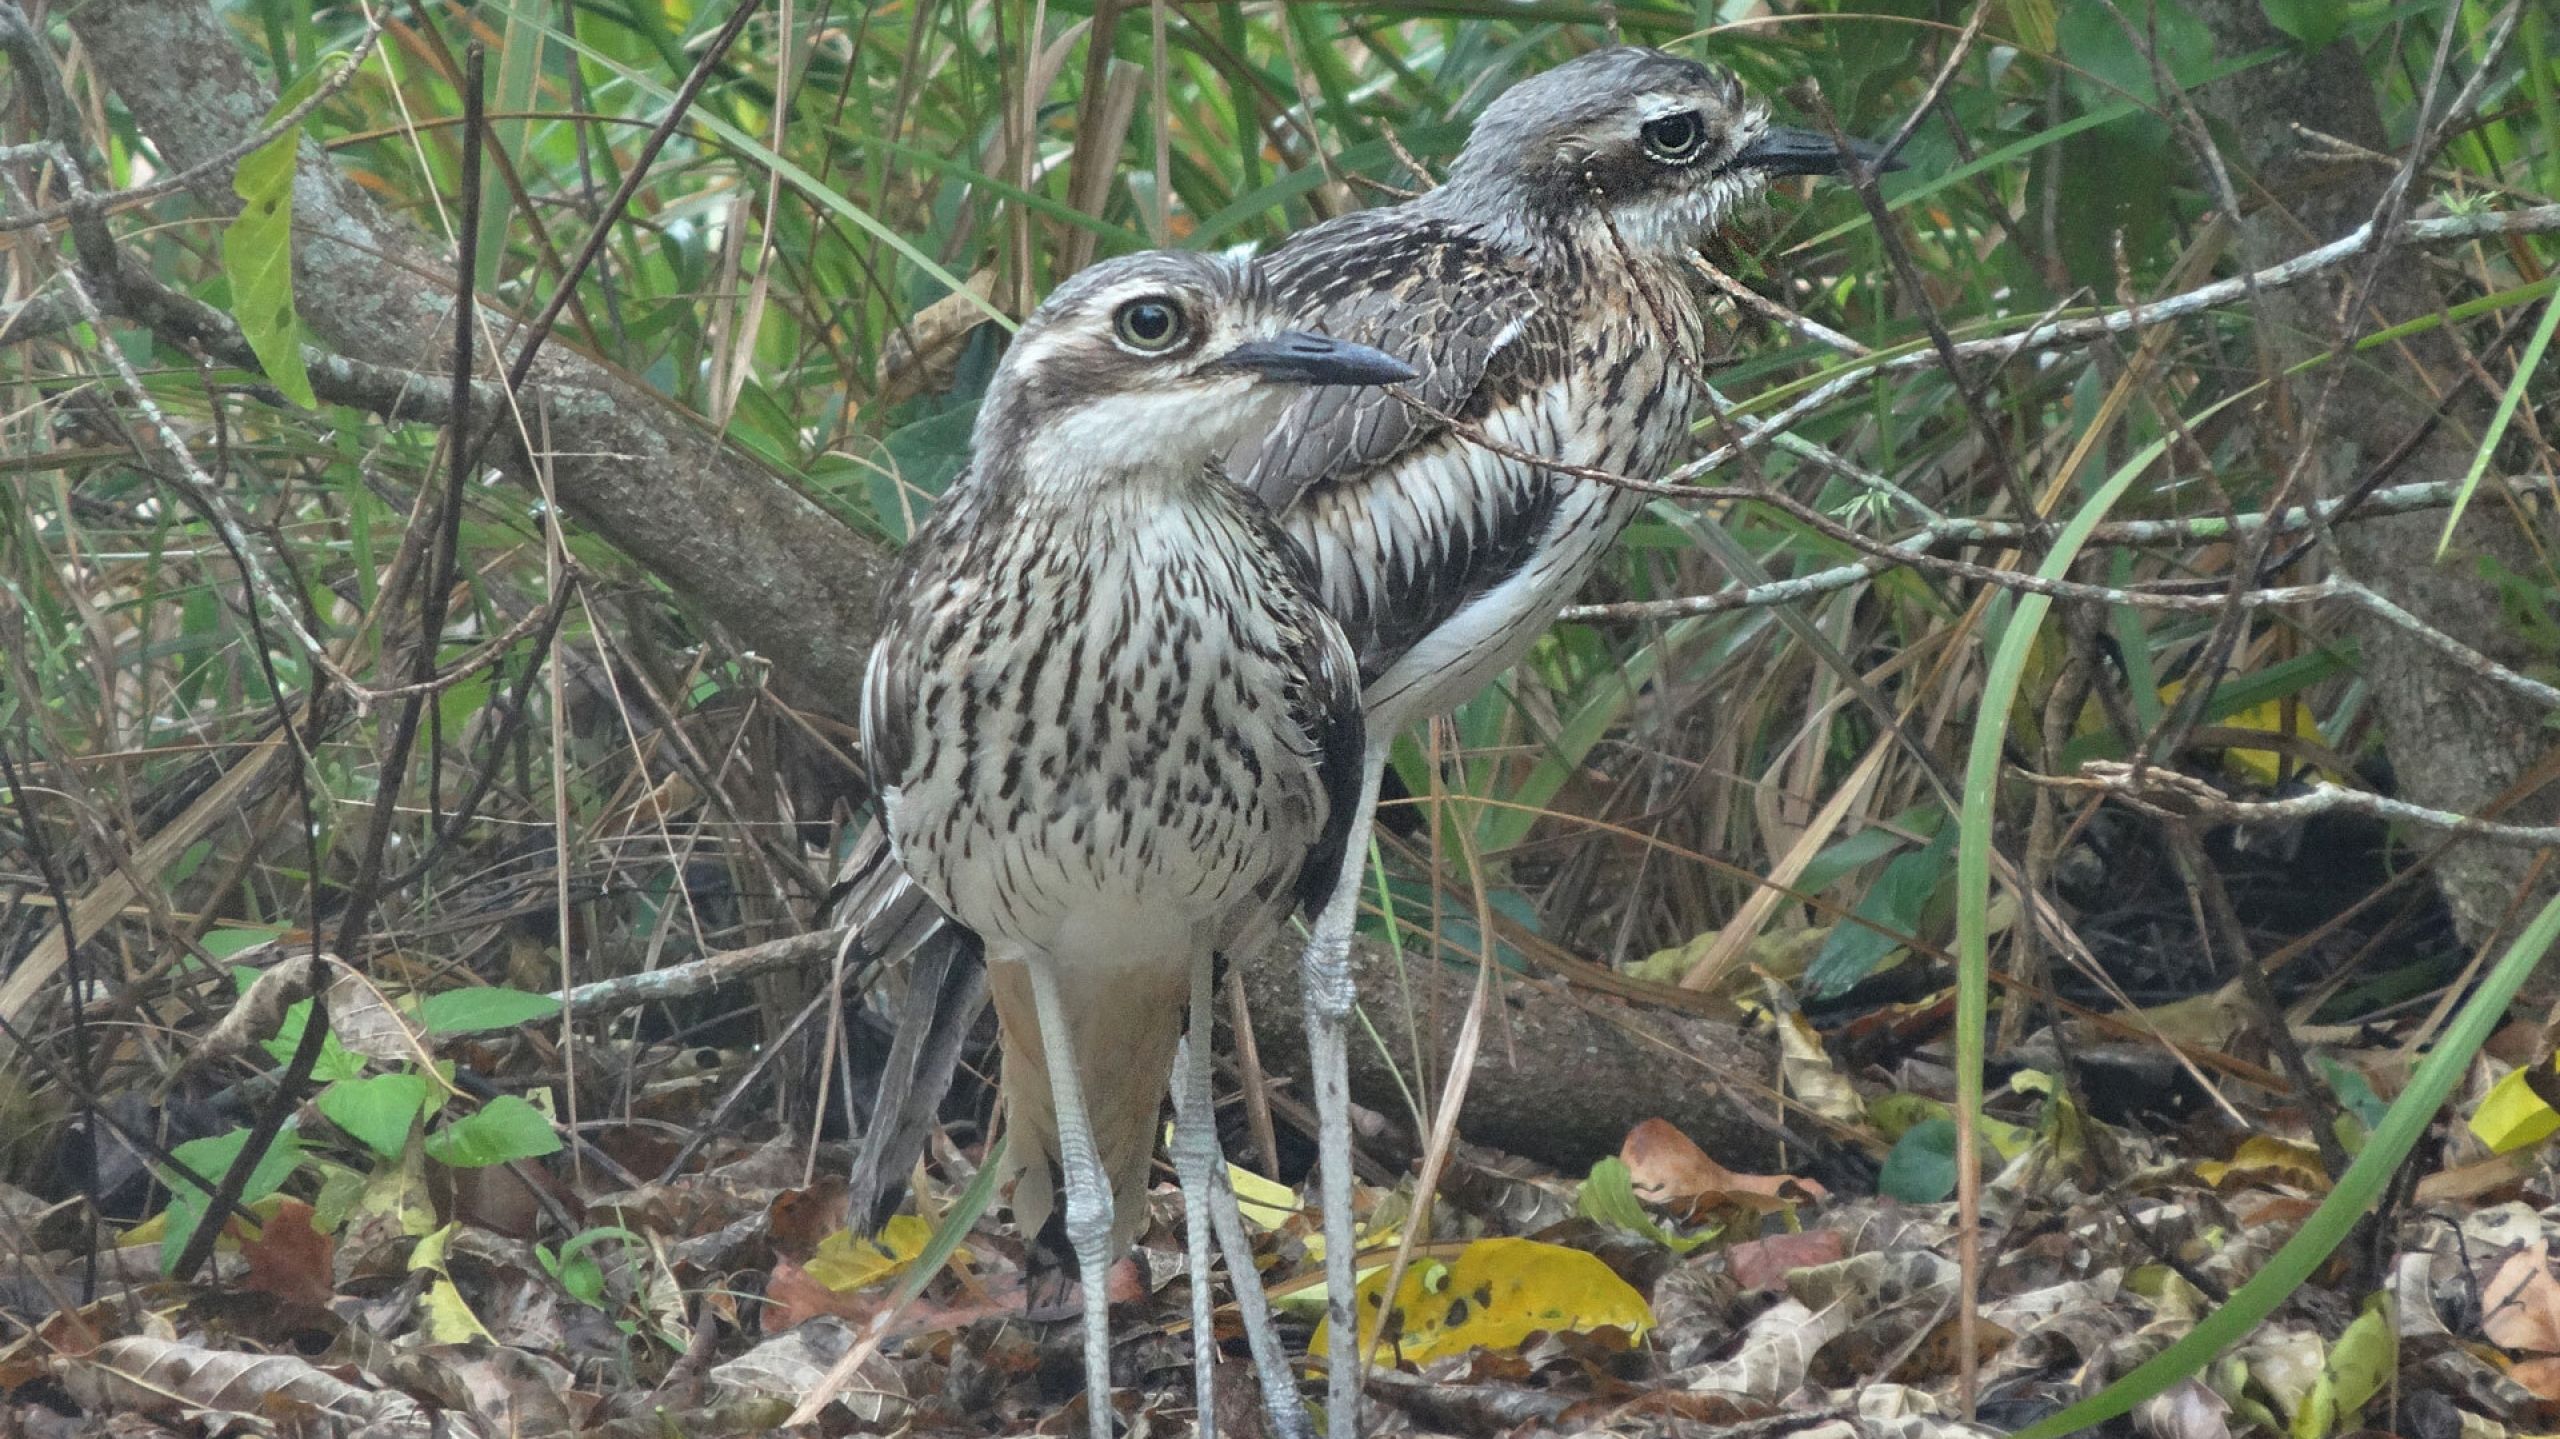 A good-looking bird: the bush stone-curlew that loves its own